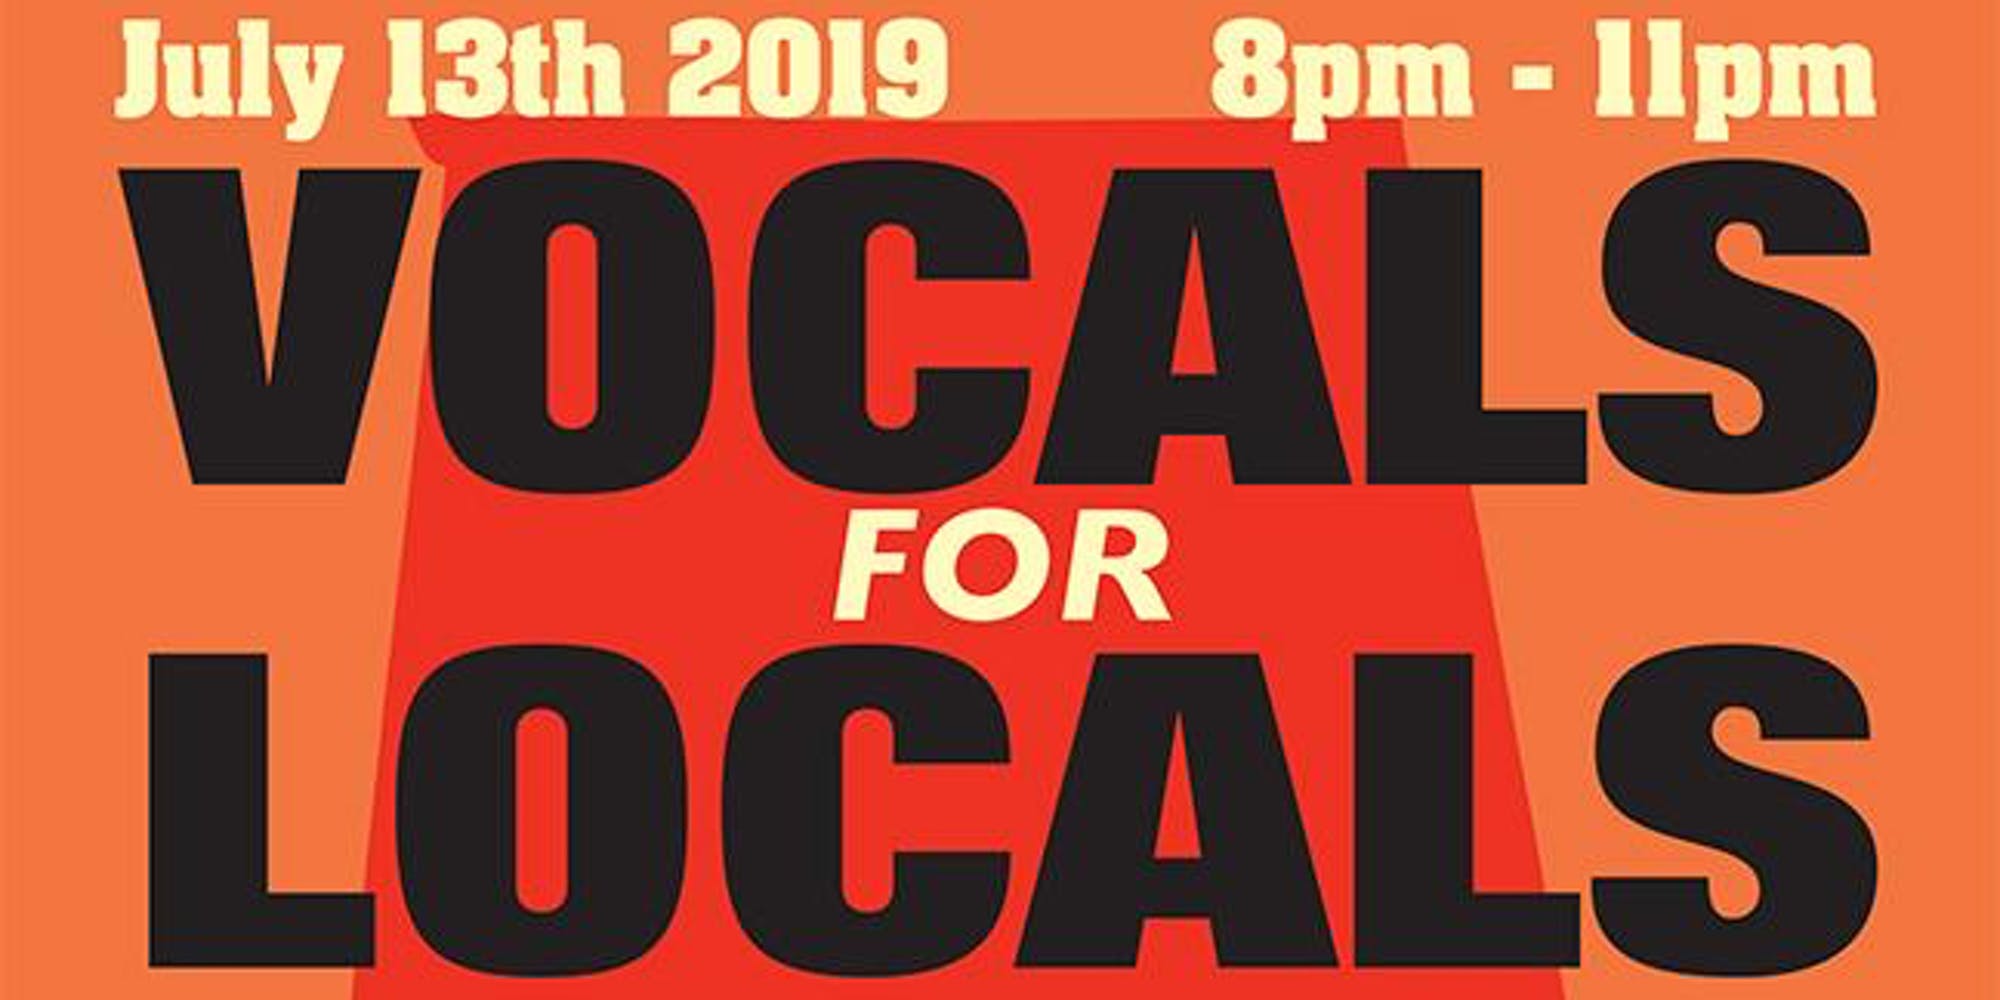 ‘Vocals for Locals’ July 13 to benefit Community Foundation of East Alabama’s Tornado Relief Fund